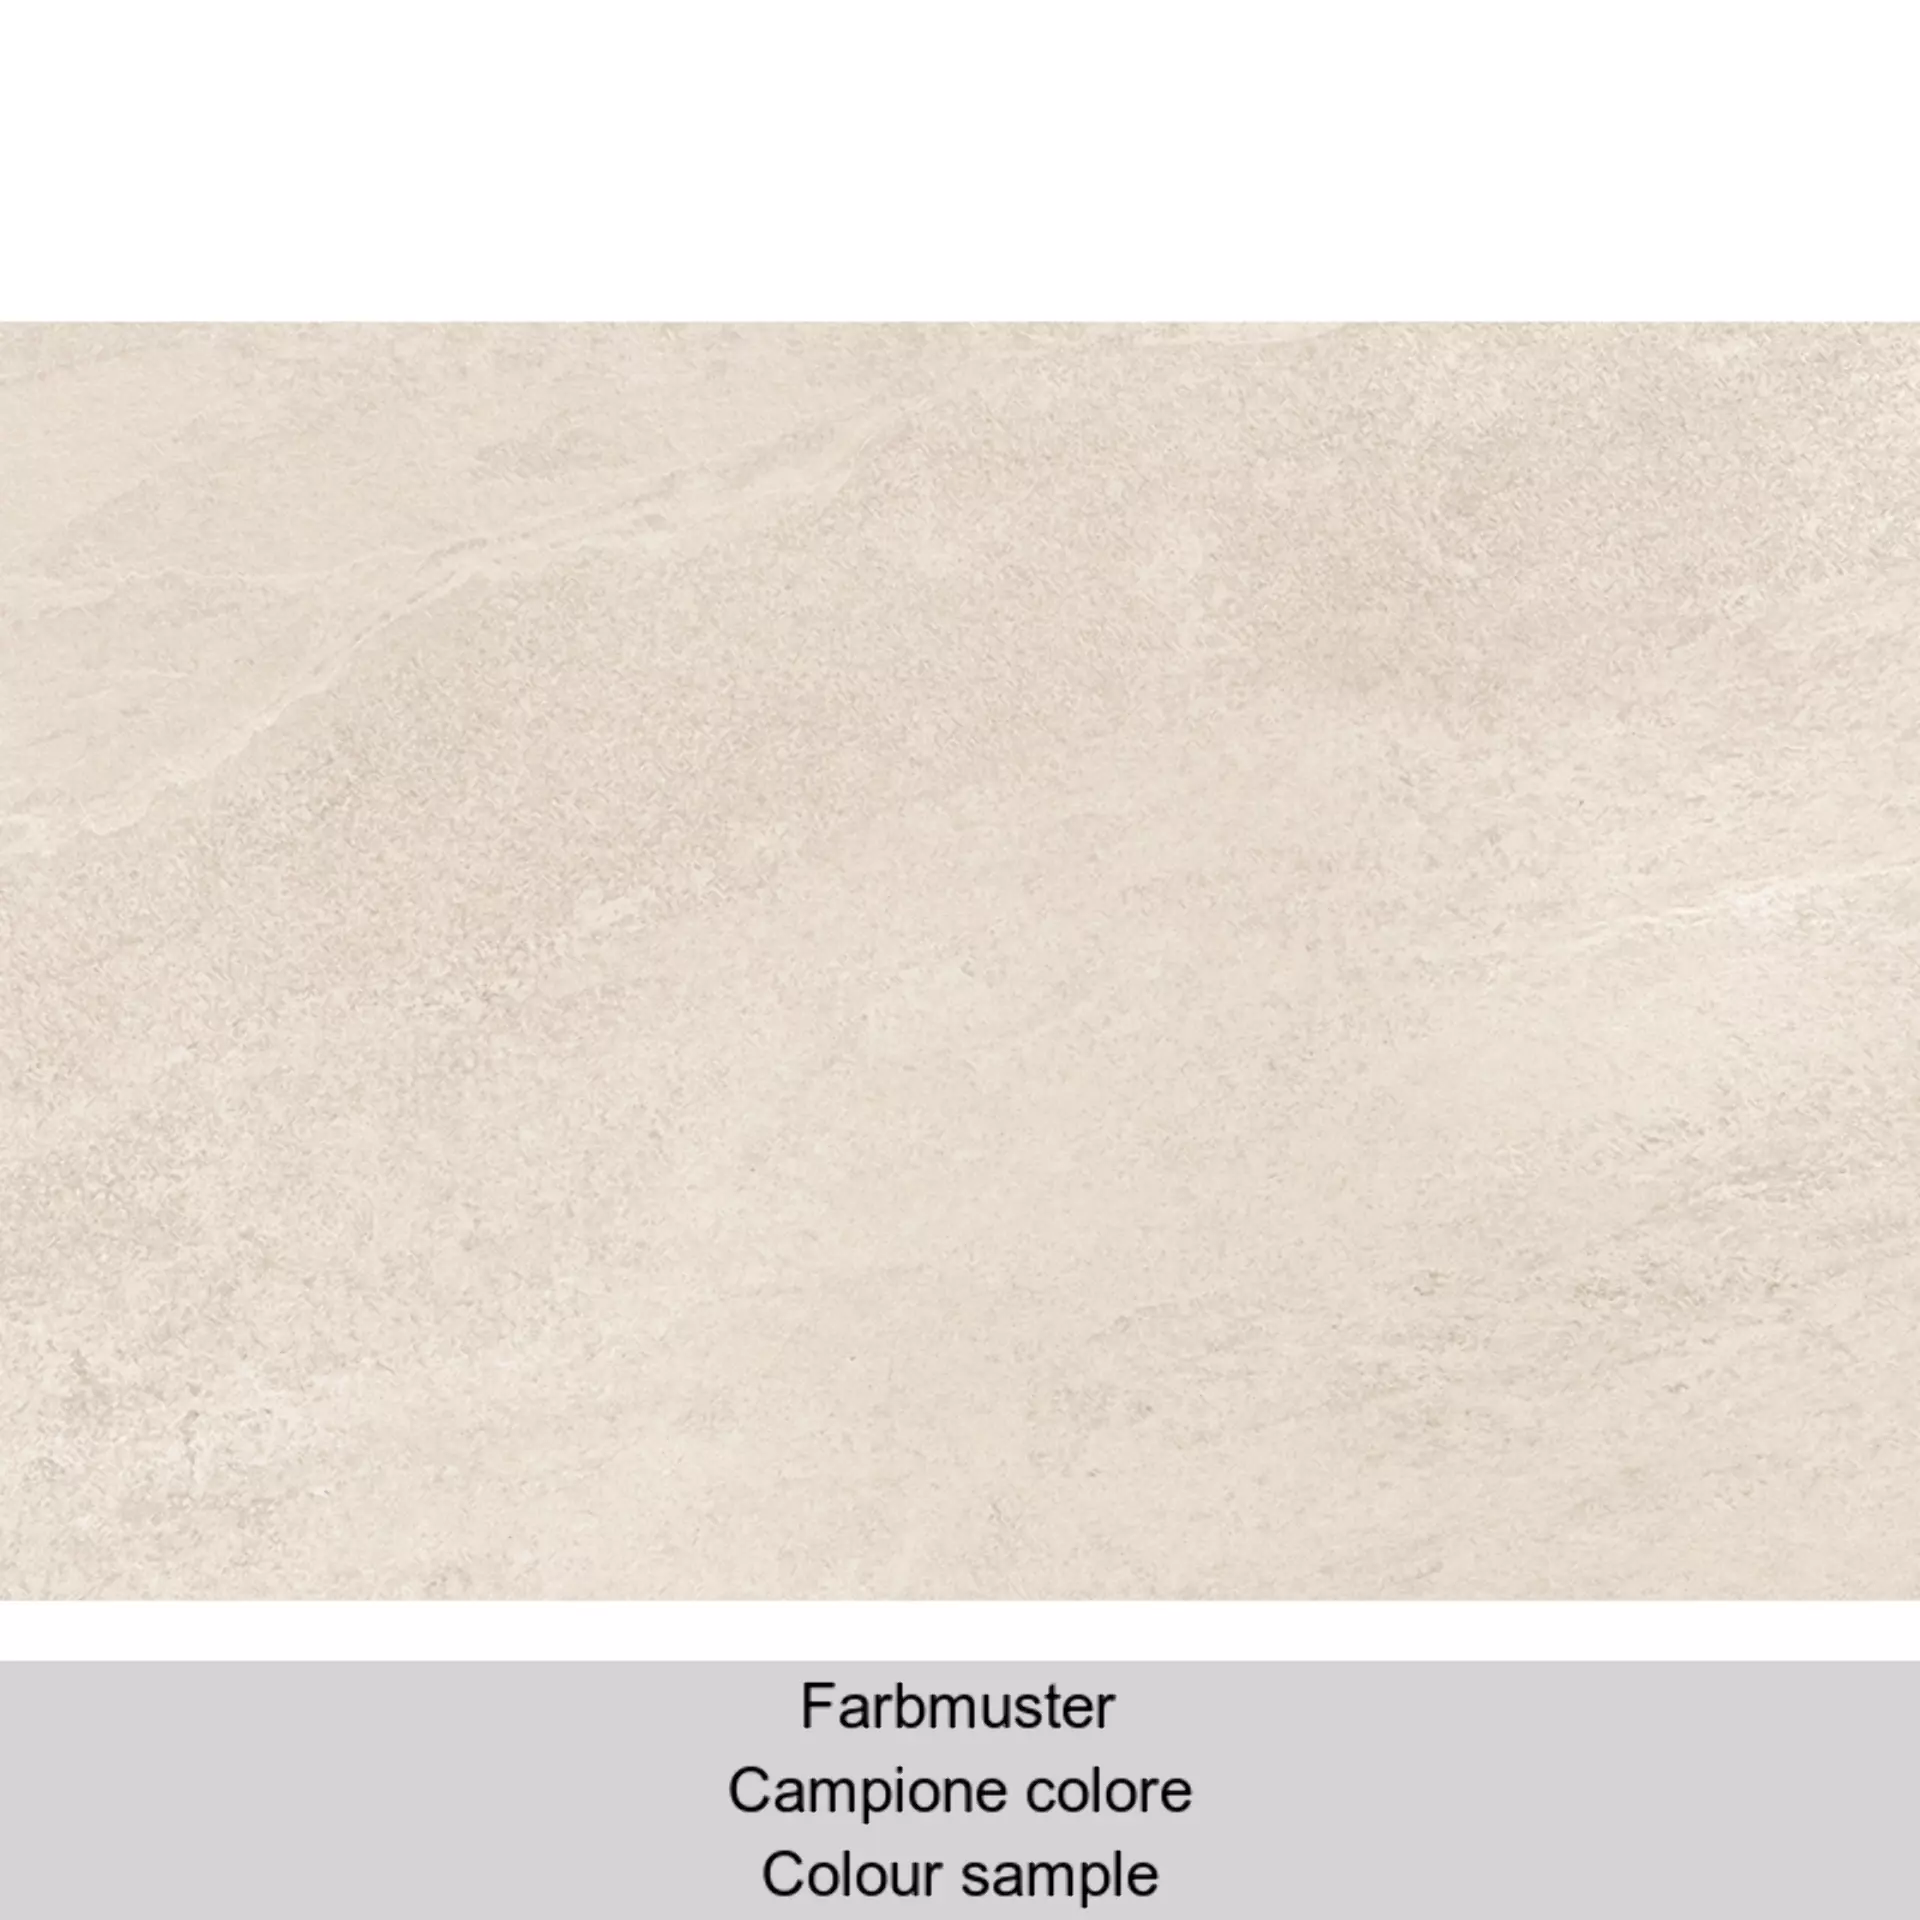 Novabell Norgestone Ivory Outwalk – Naturale Ivory NSTM833 natur outdoor 60x90cm Modul 3 Formati 20mm